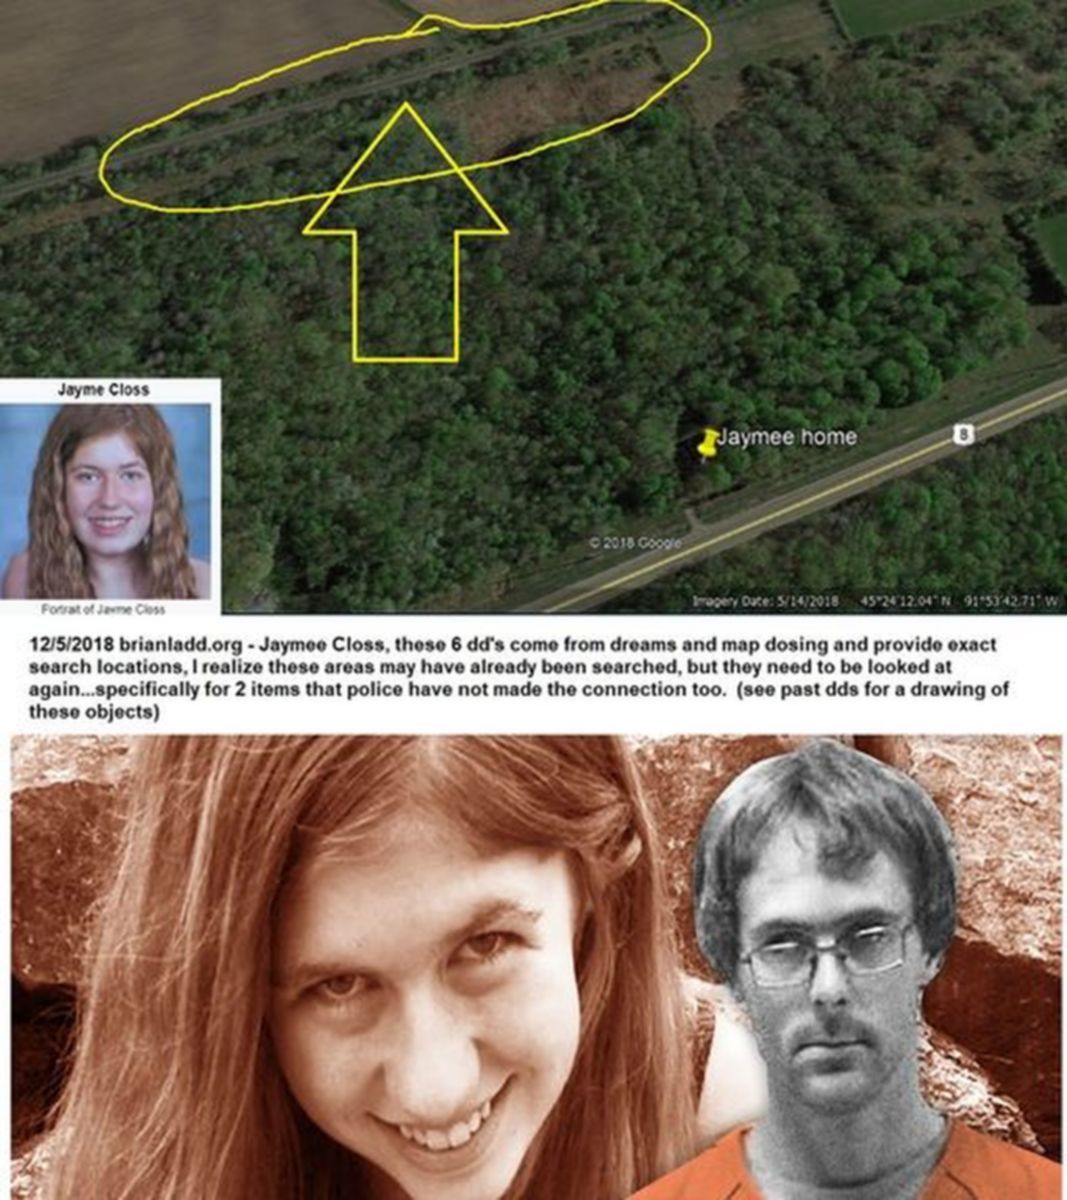 Jaymee Closs Missing 11415 5 December 2018 8 - 12/5/2018 BrianLadd.Org - Jaymee Closs, These 6 Dd'S Come From Dream...
12/5/2018 BrianLadd.Org - Jaymee Closs, These 6 Dd'S Come From Dreams And Map Dosing And Provide Exact Search Locations, I Realize These Areas May Have Already Been Searched, But They Need To Be Looked At Again  Specifically For 2 Items That Police Have Not Made The Connection Too.  (see Past Dds For A Drawing Of These Objects)
